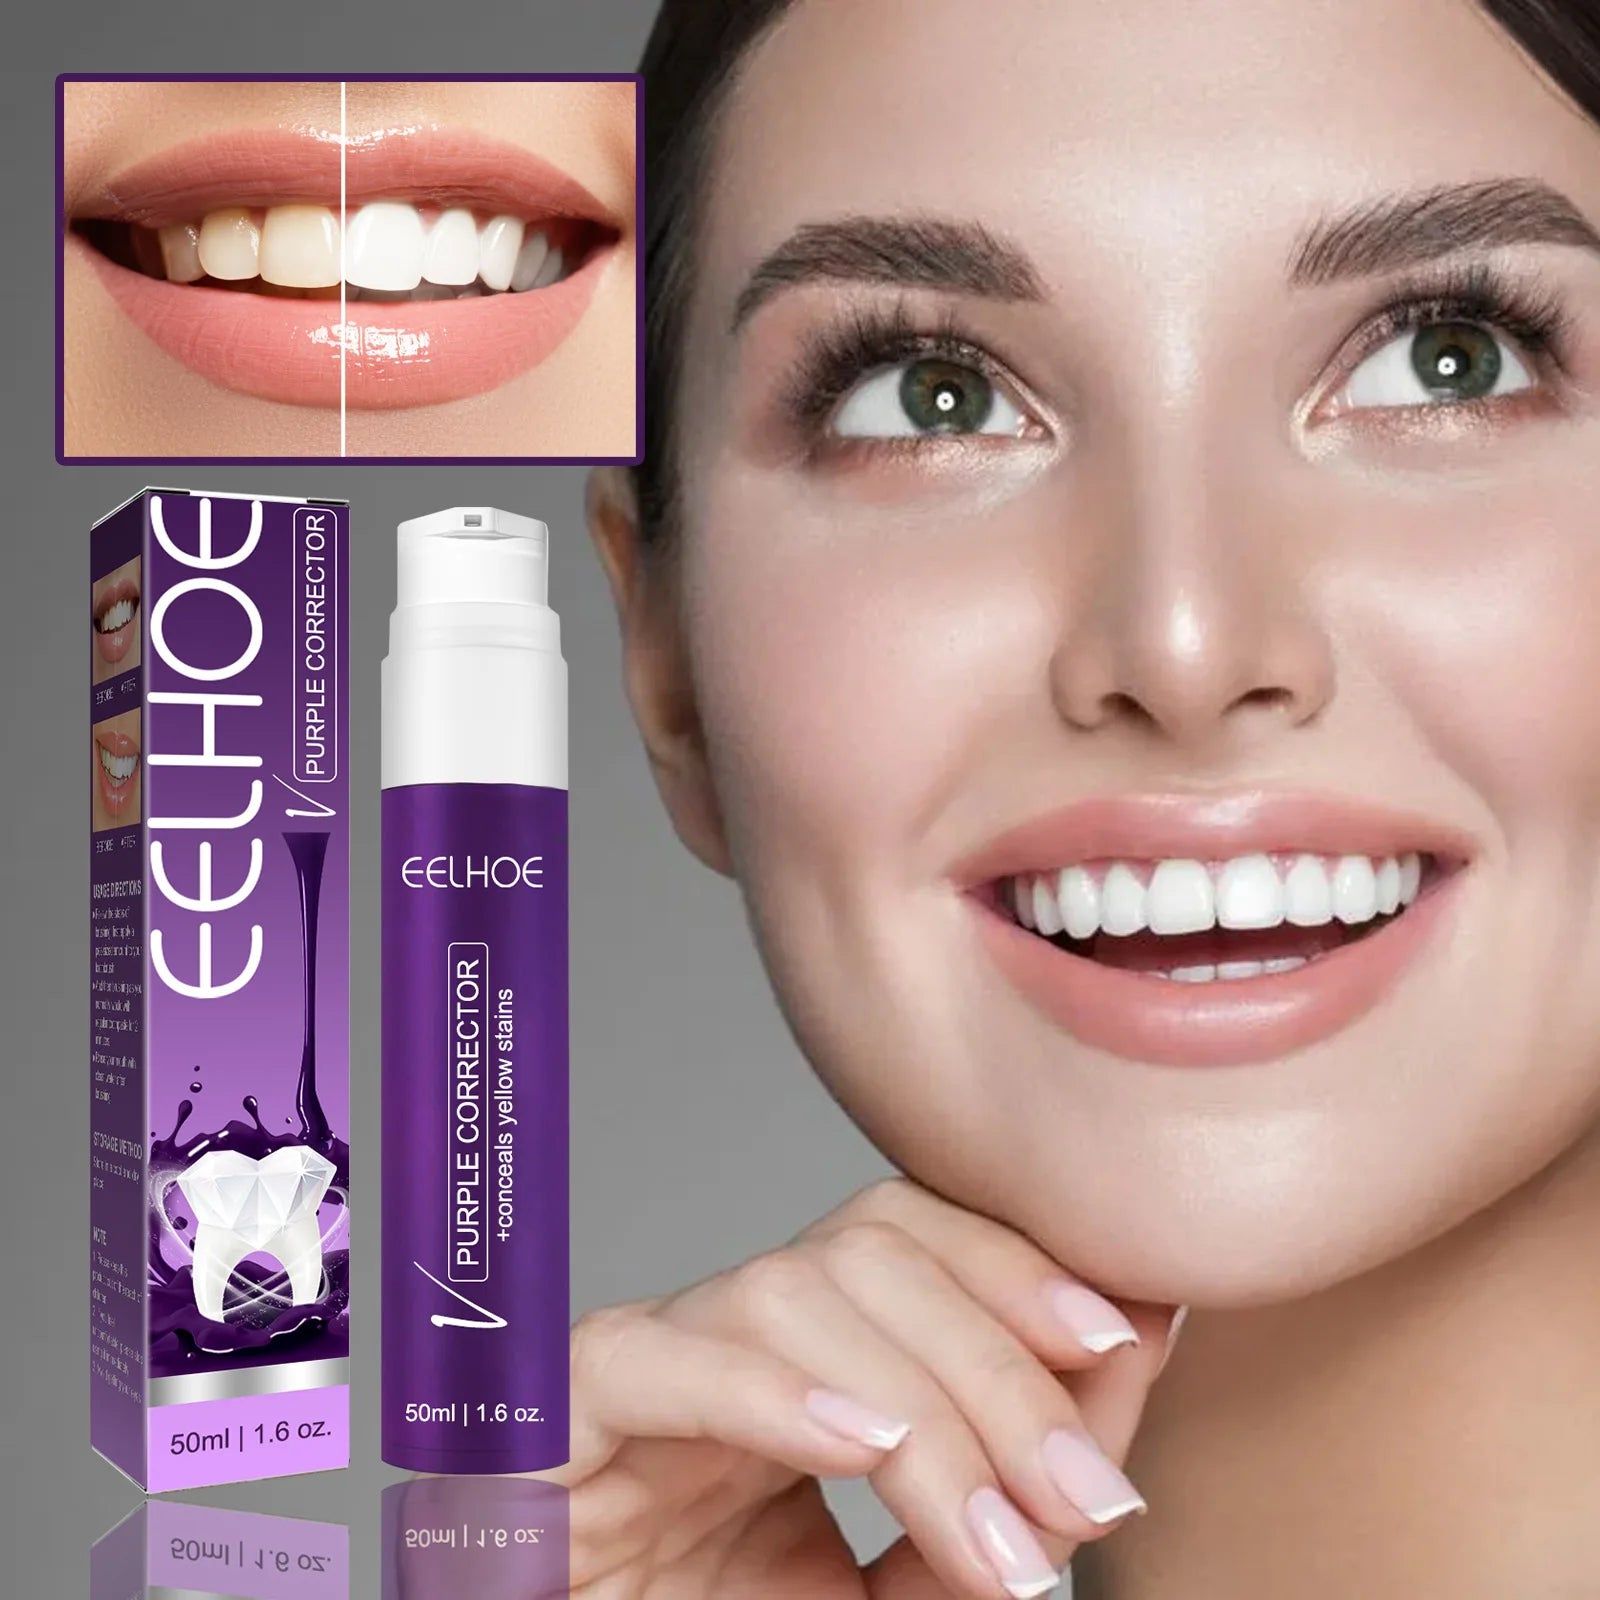 EELHOE Whitening Toothpaste Stain Removal